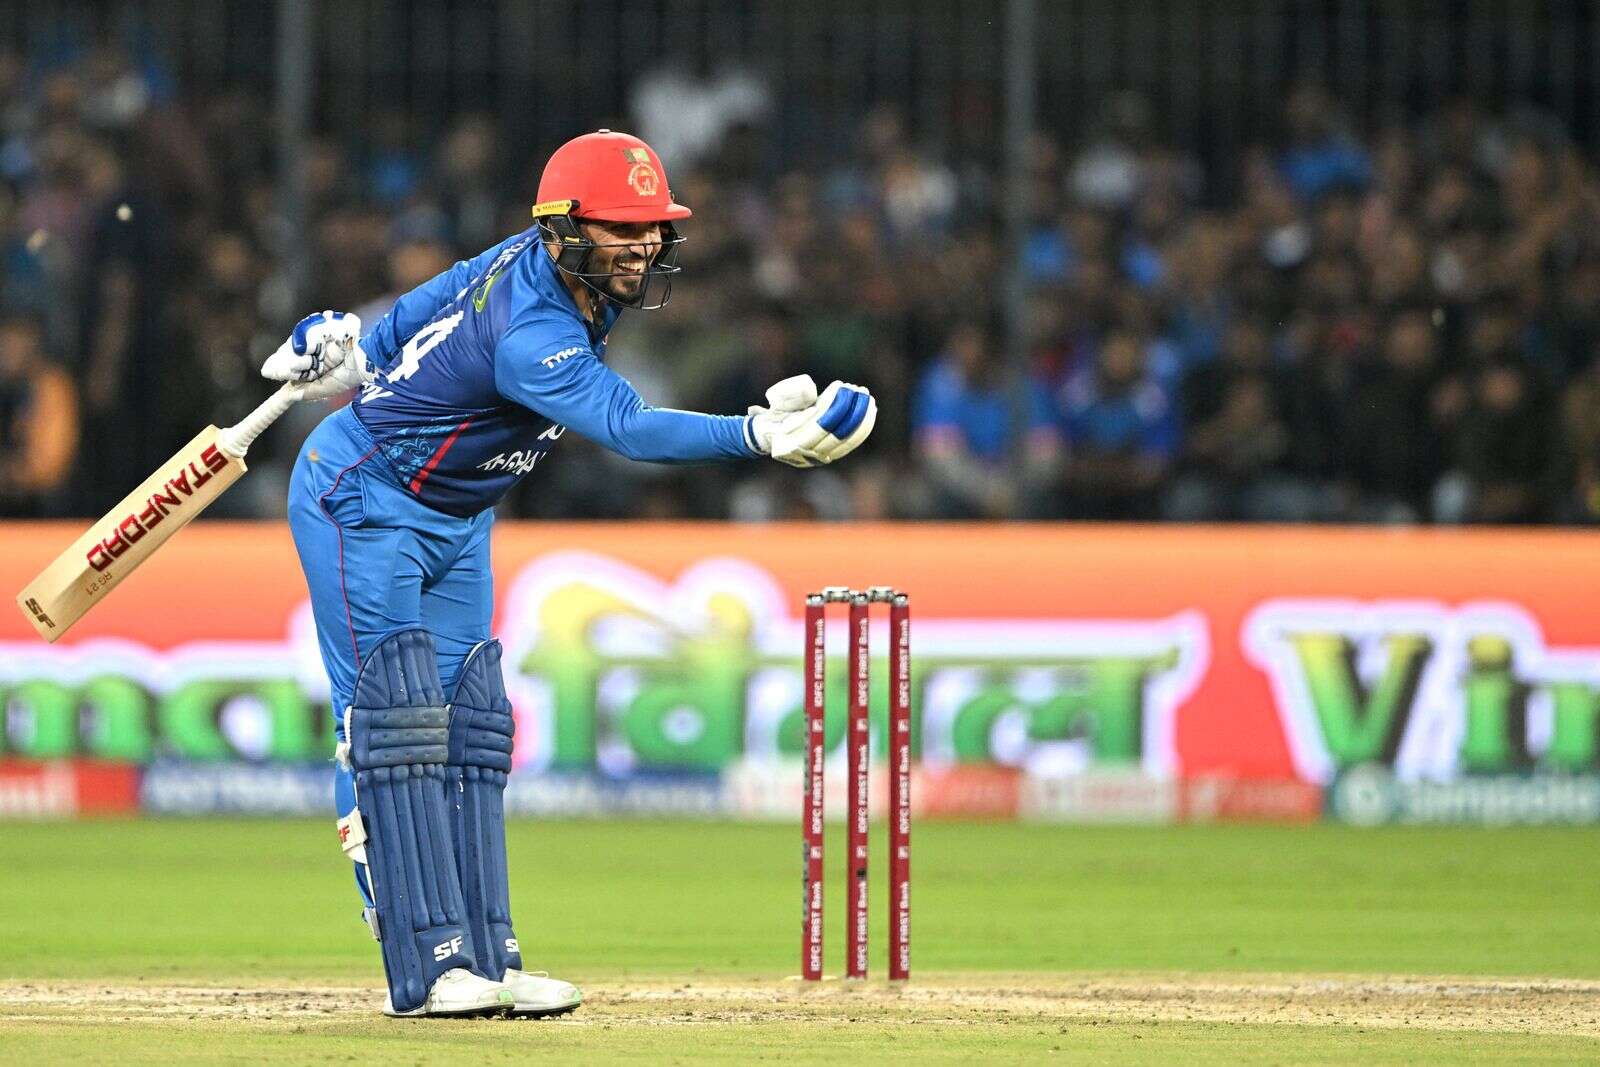 Afghanistan reach 172 after Naib fifty in India T20